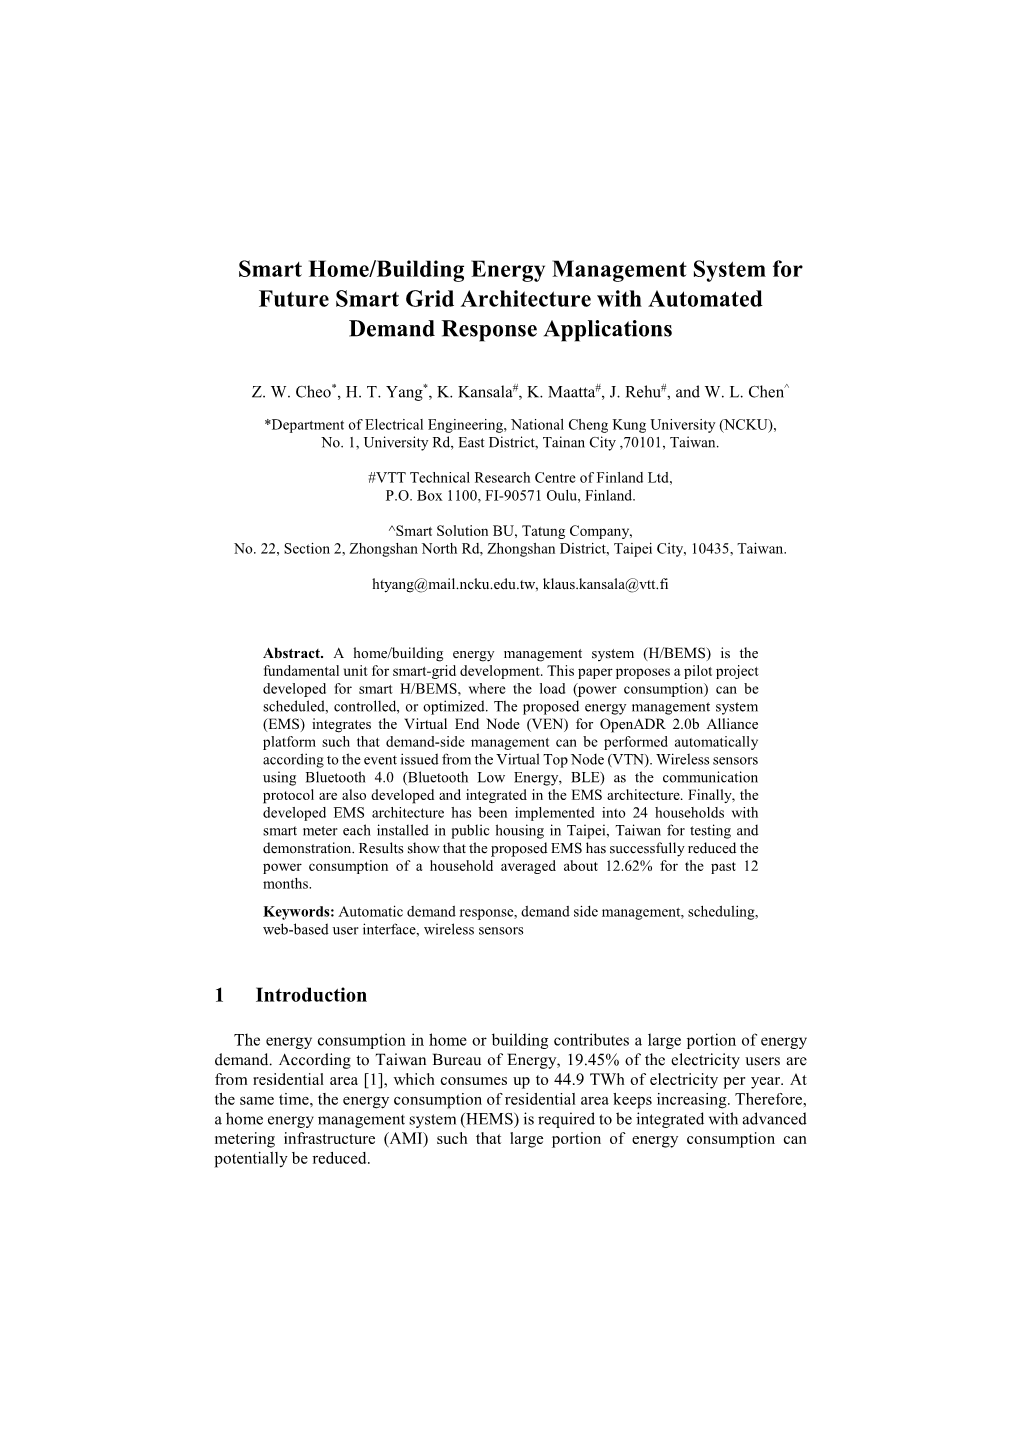 Smart Home/Building Energy Management System for Future Smart Grid Architecture with Automated Demand Response Applications